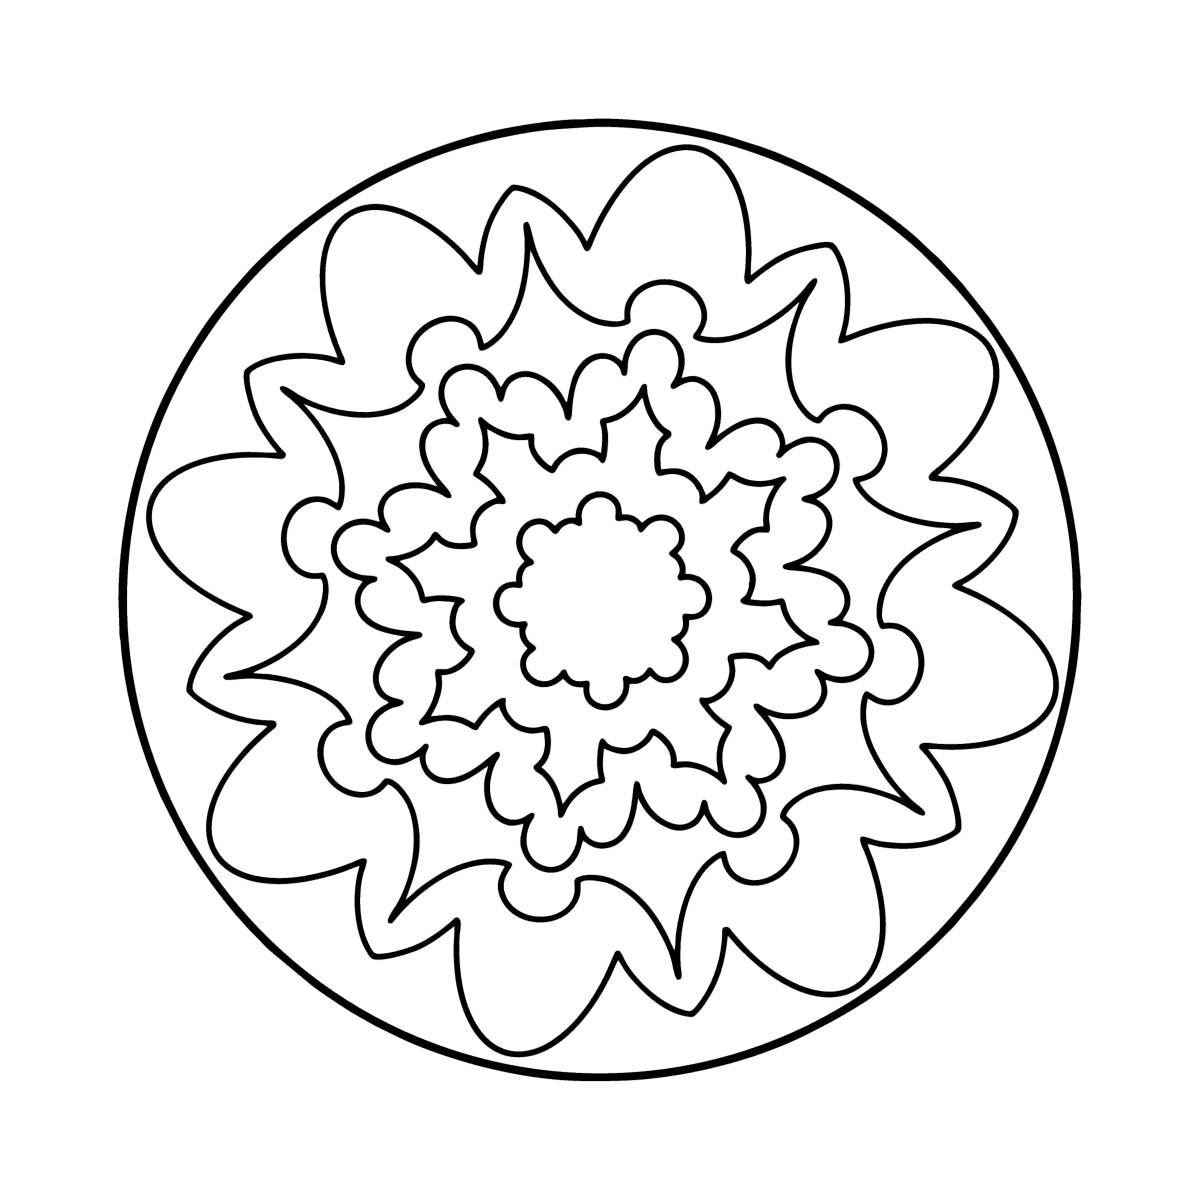 Mandala coloring page - 6 elements ♥ Online and Print for Free!